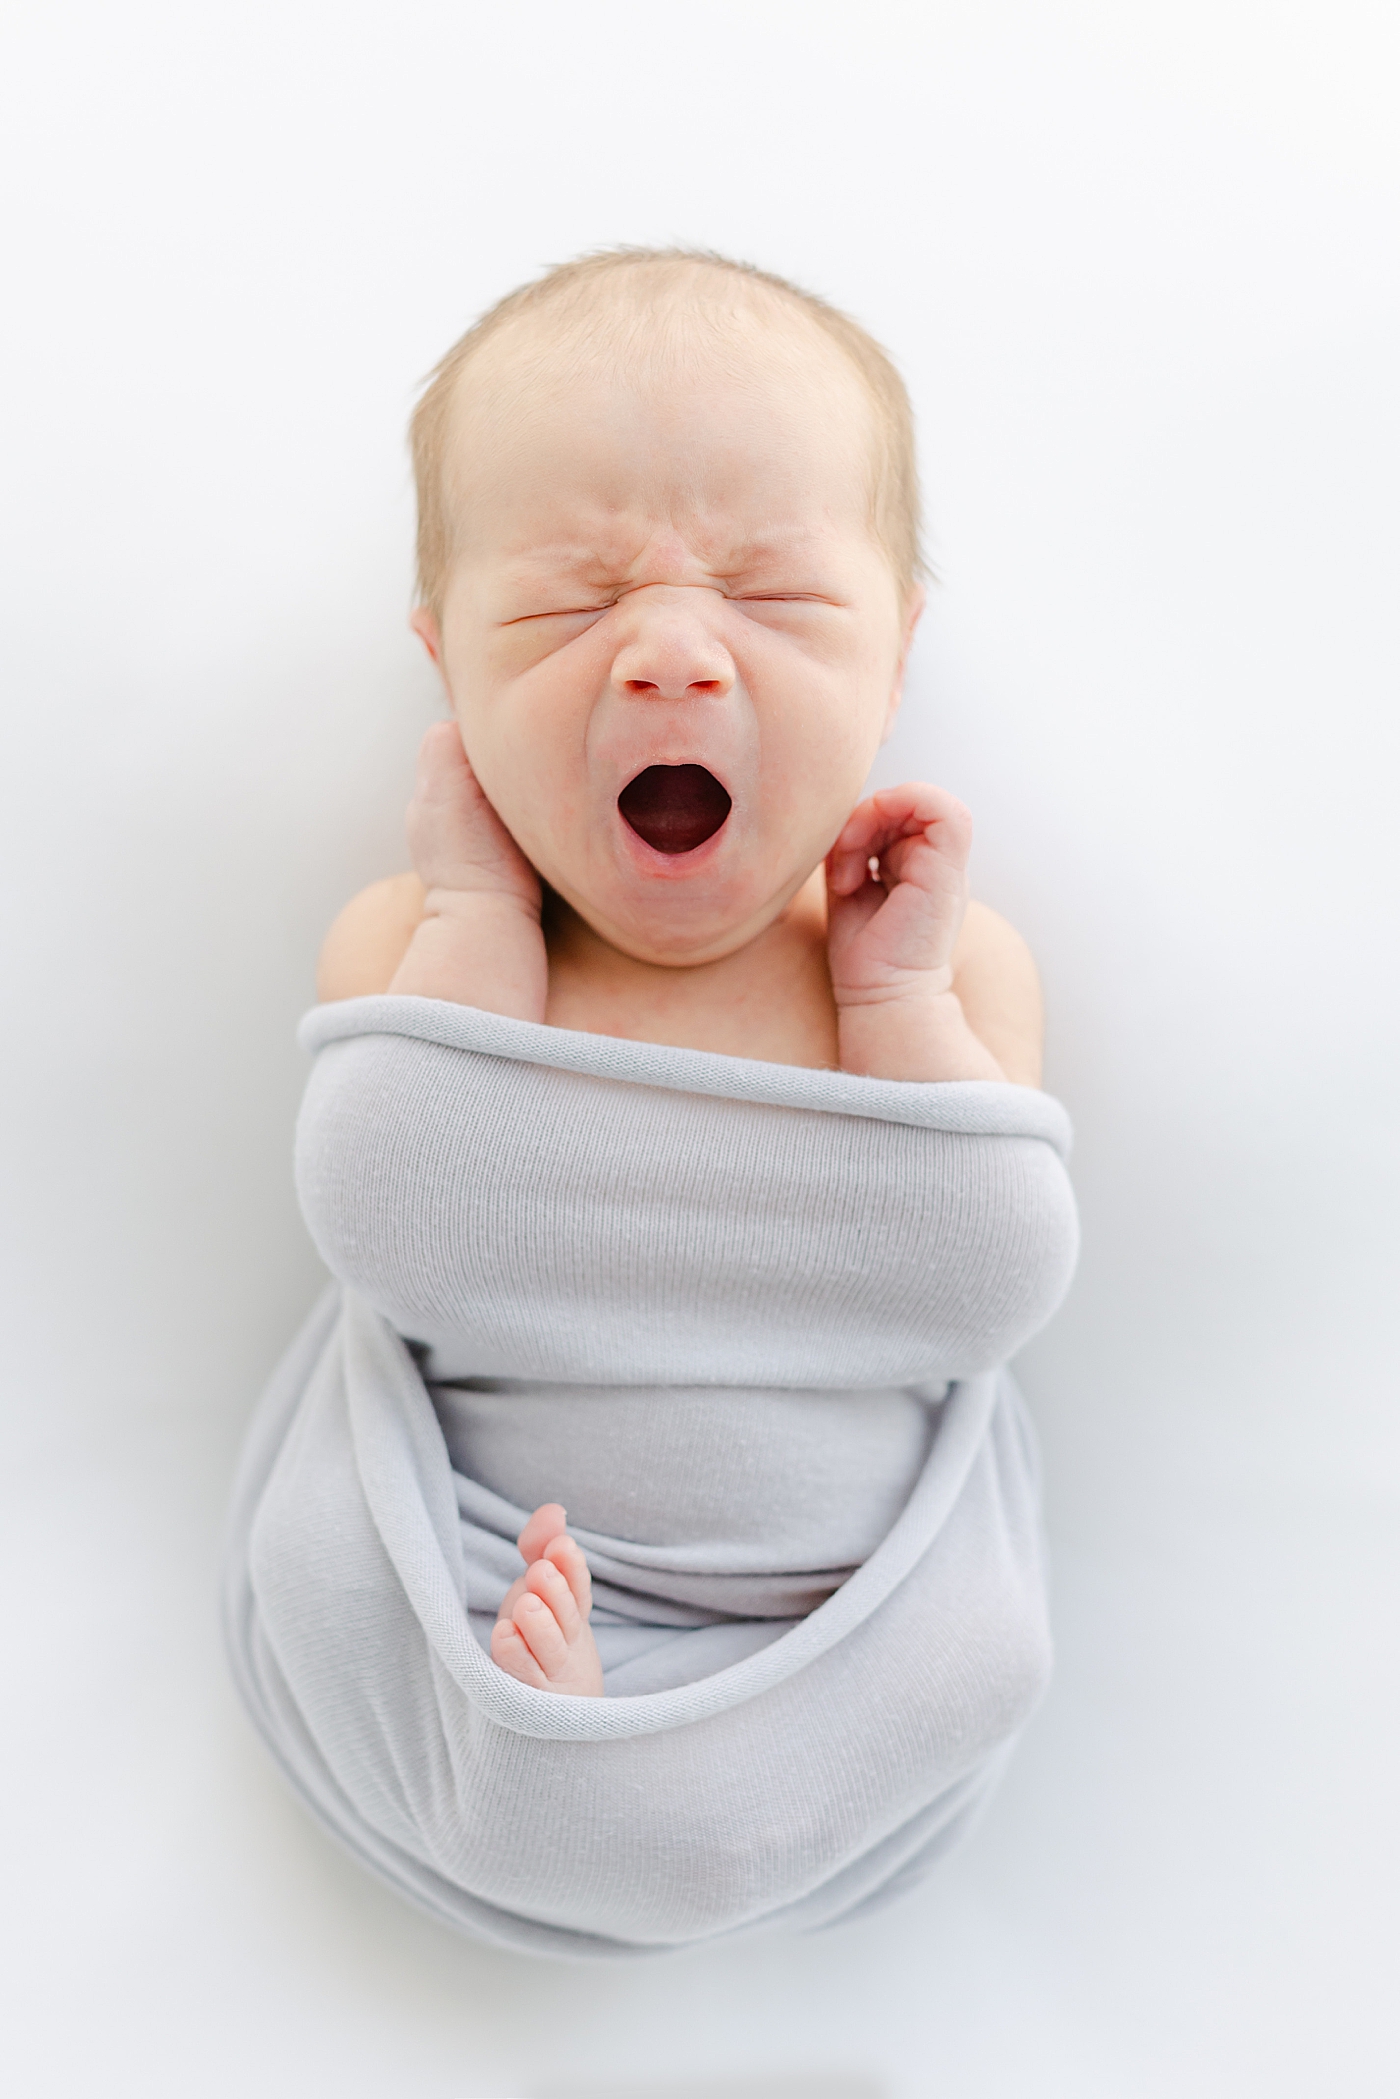 Yawning newborn baby boy wrapped in a blue swaddle | Image by Sana Ahmed